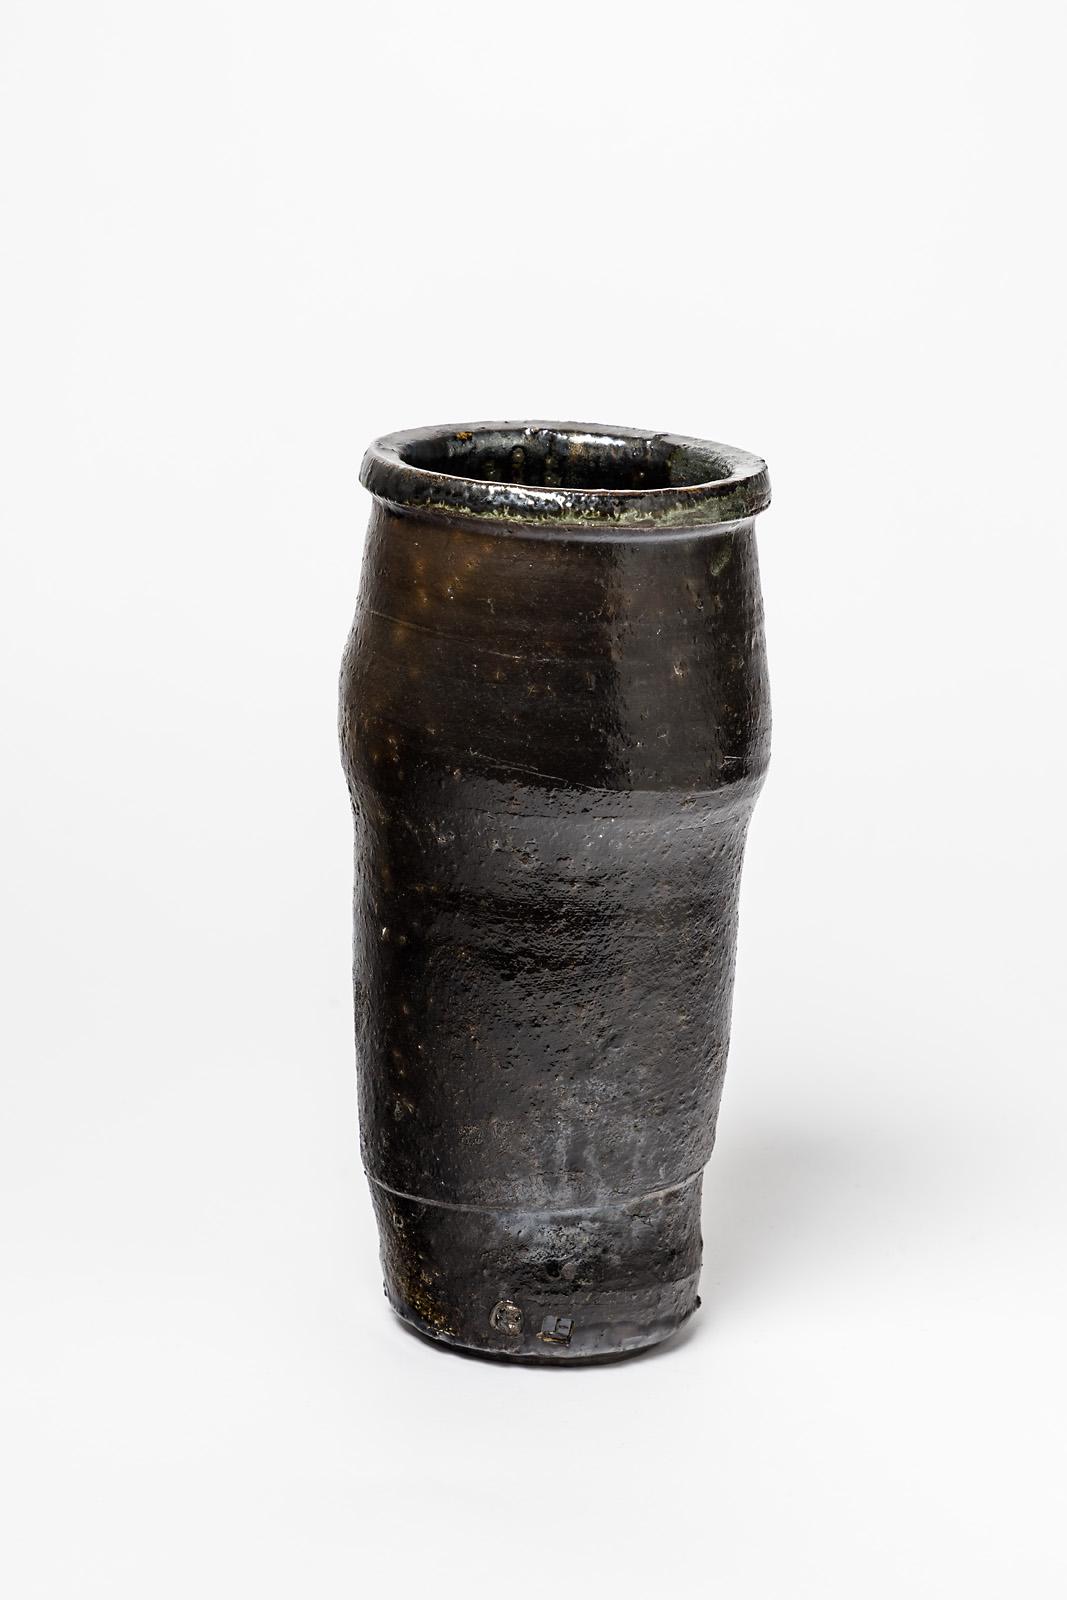 Beaux Arts Ceramic Vase by Camille Virot, circa 1990-2000 For Sale